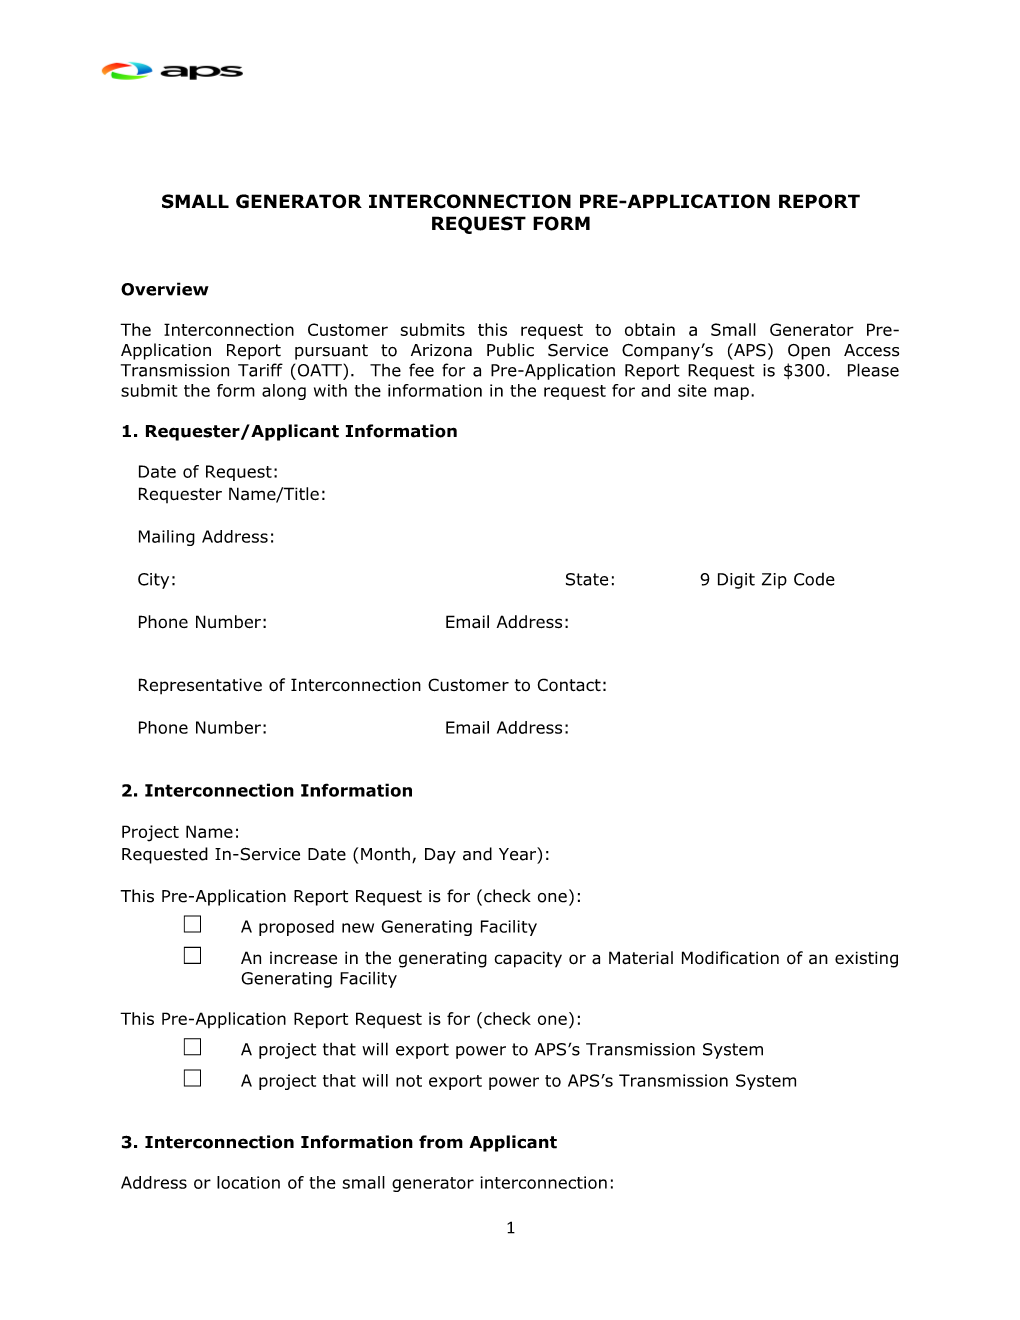 Small Generator Interconnection Pre-Application Report Request Form